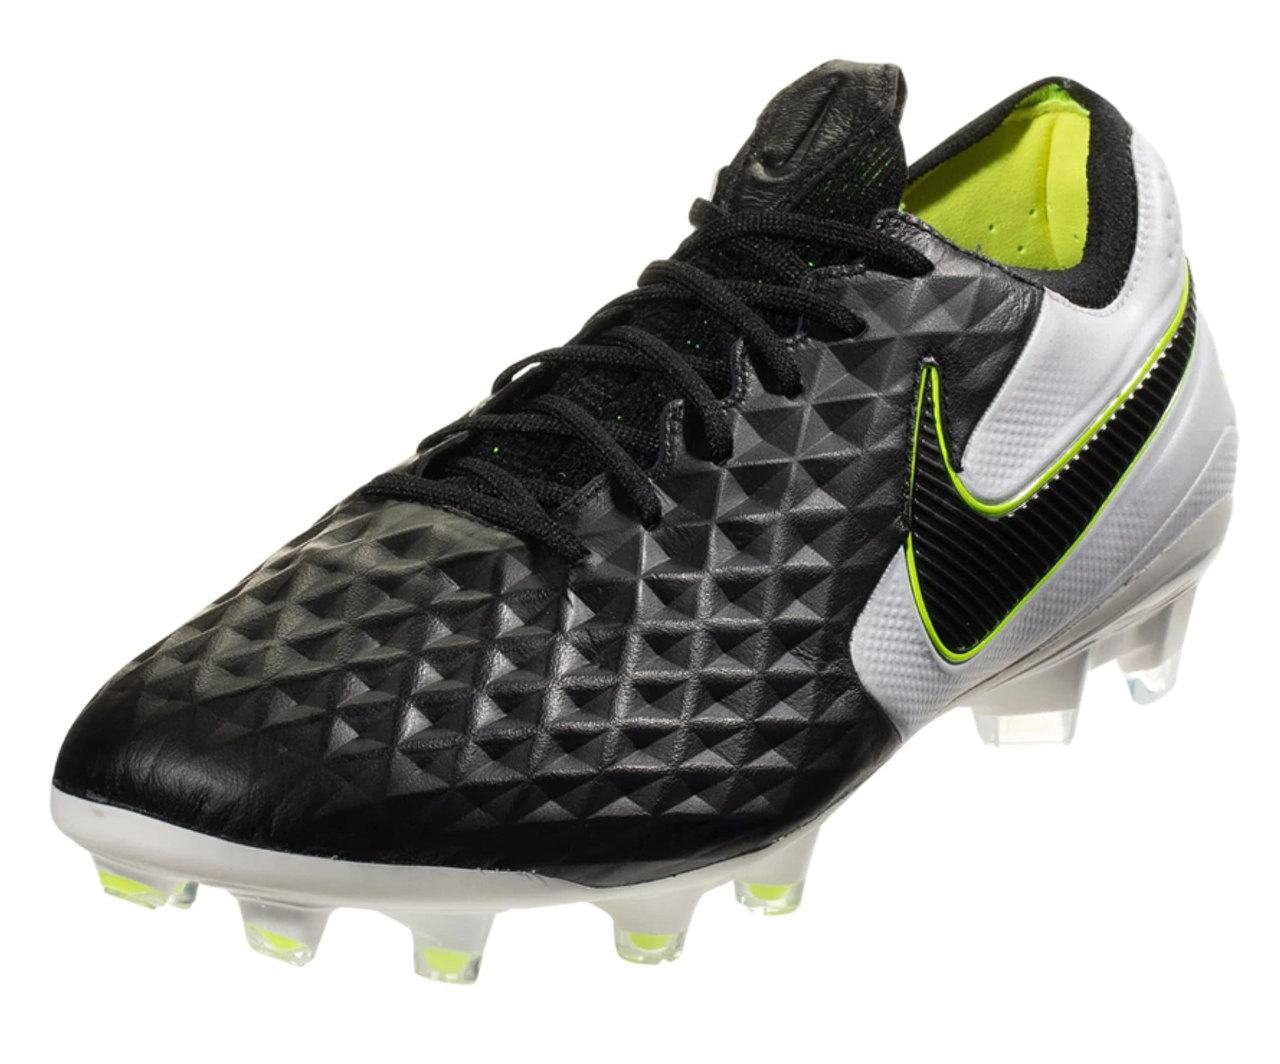 Nike Tiempo Legend 8 Elite Archives Soccer Reviews For You